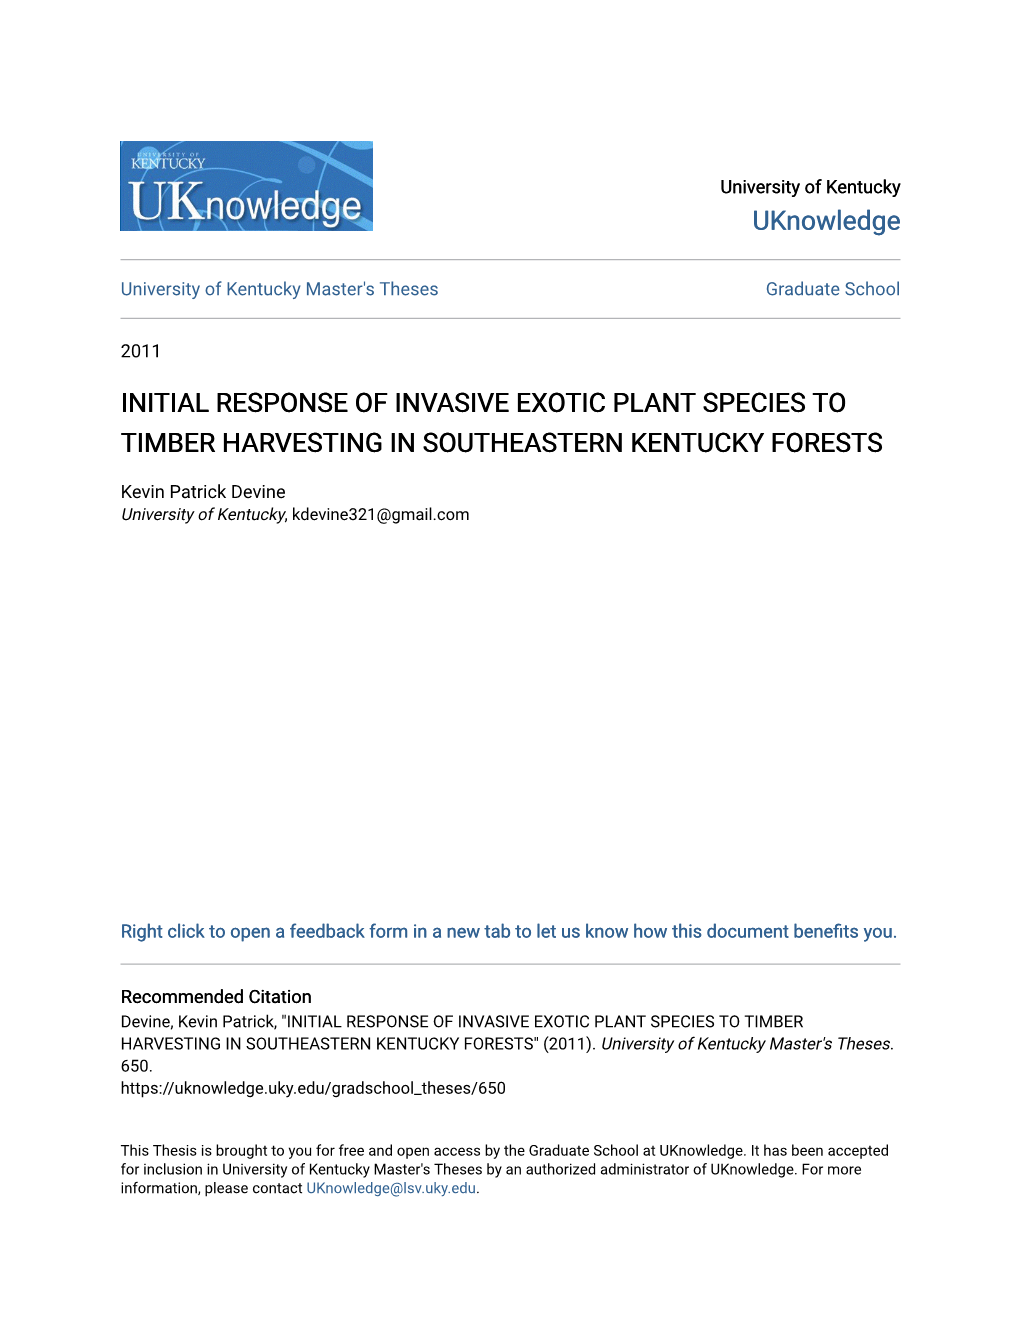 Initial Response of Invasive Exotic Plant Species to Timber Harvesting in Southeastern Kentucky Forests